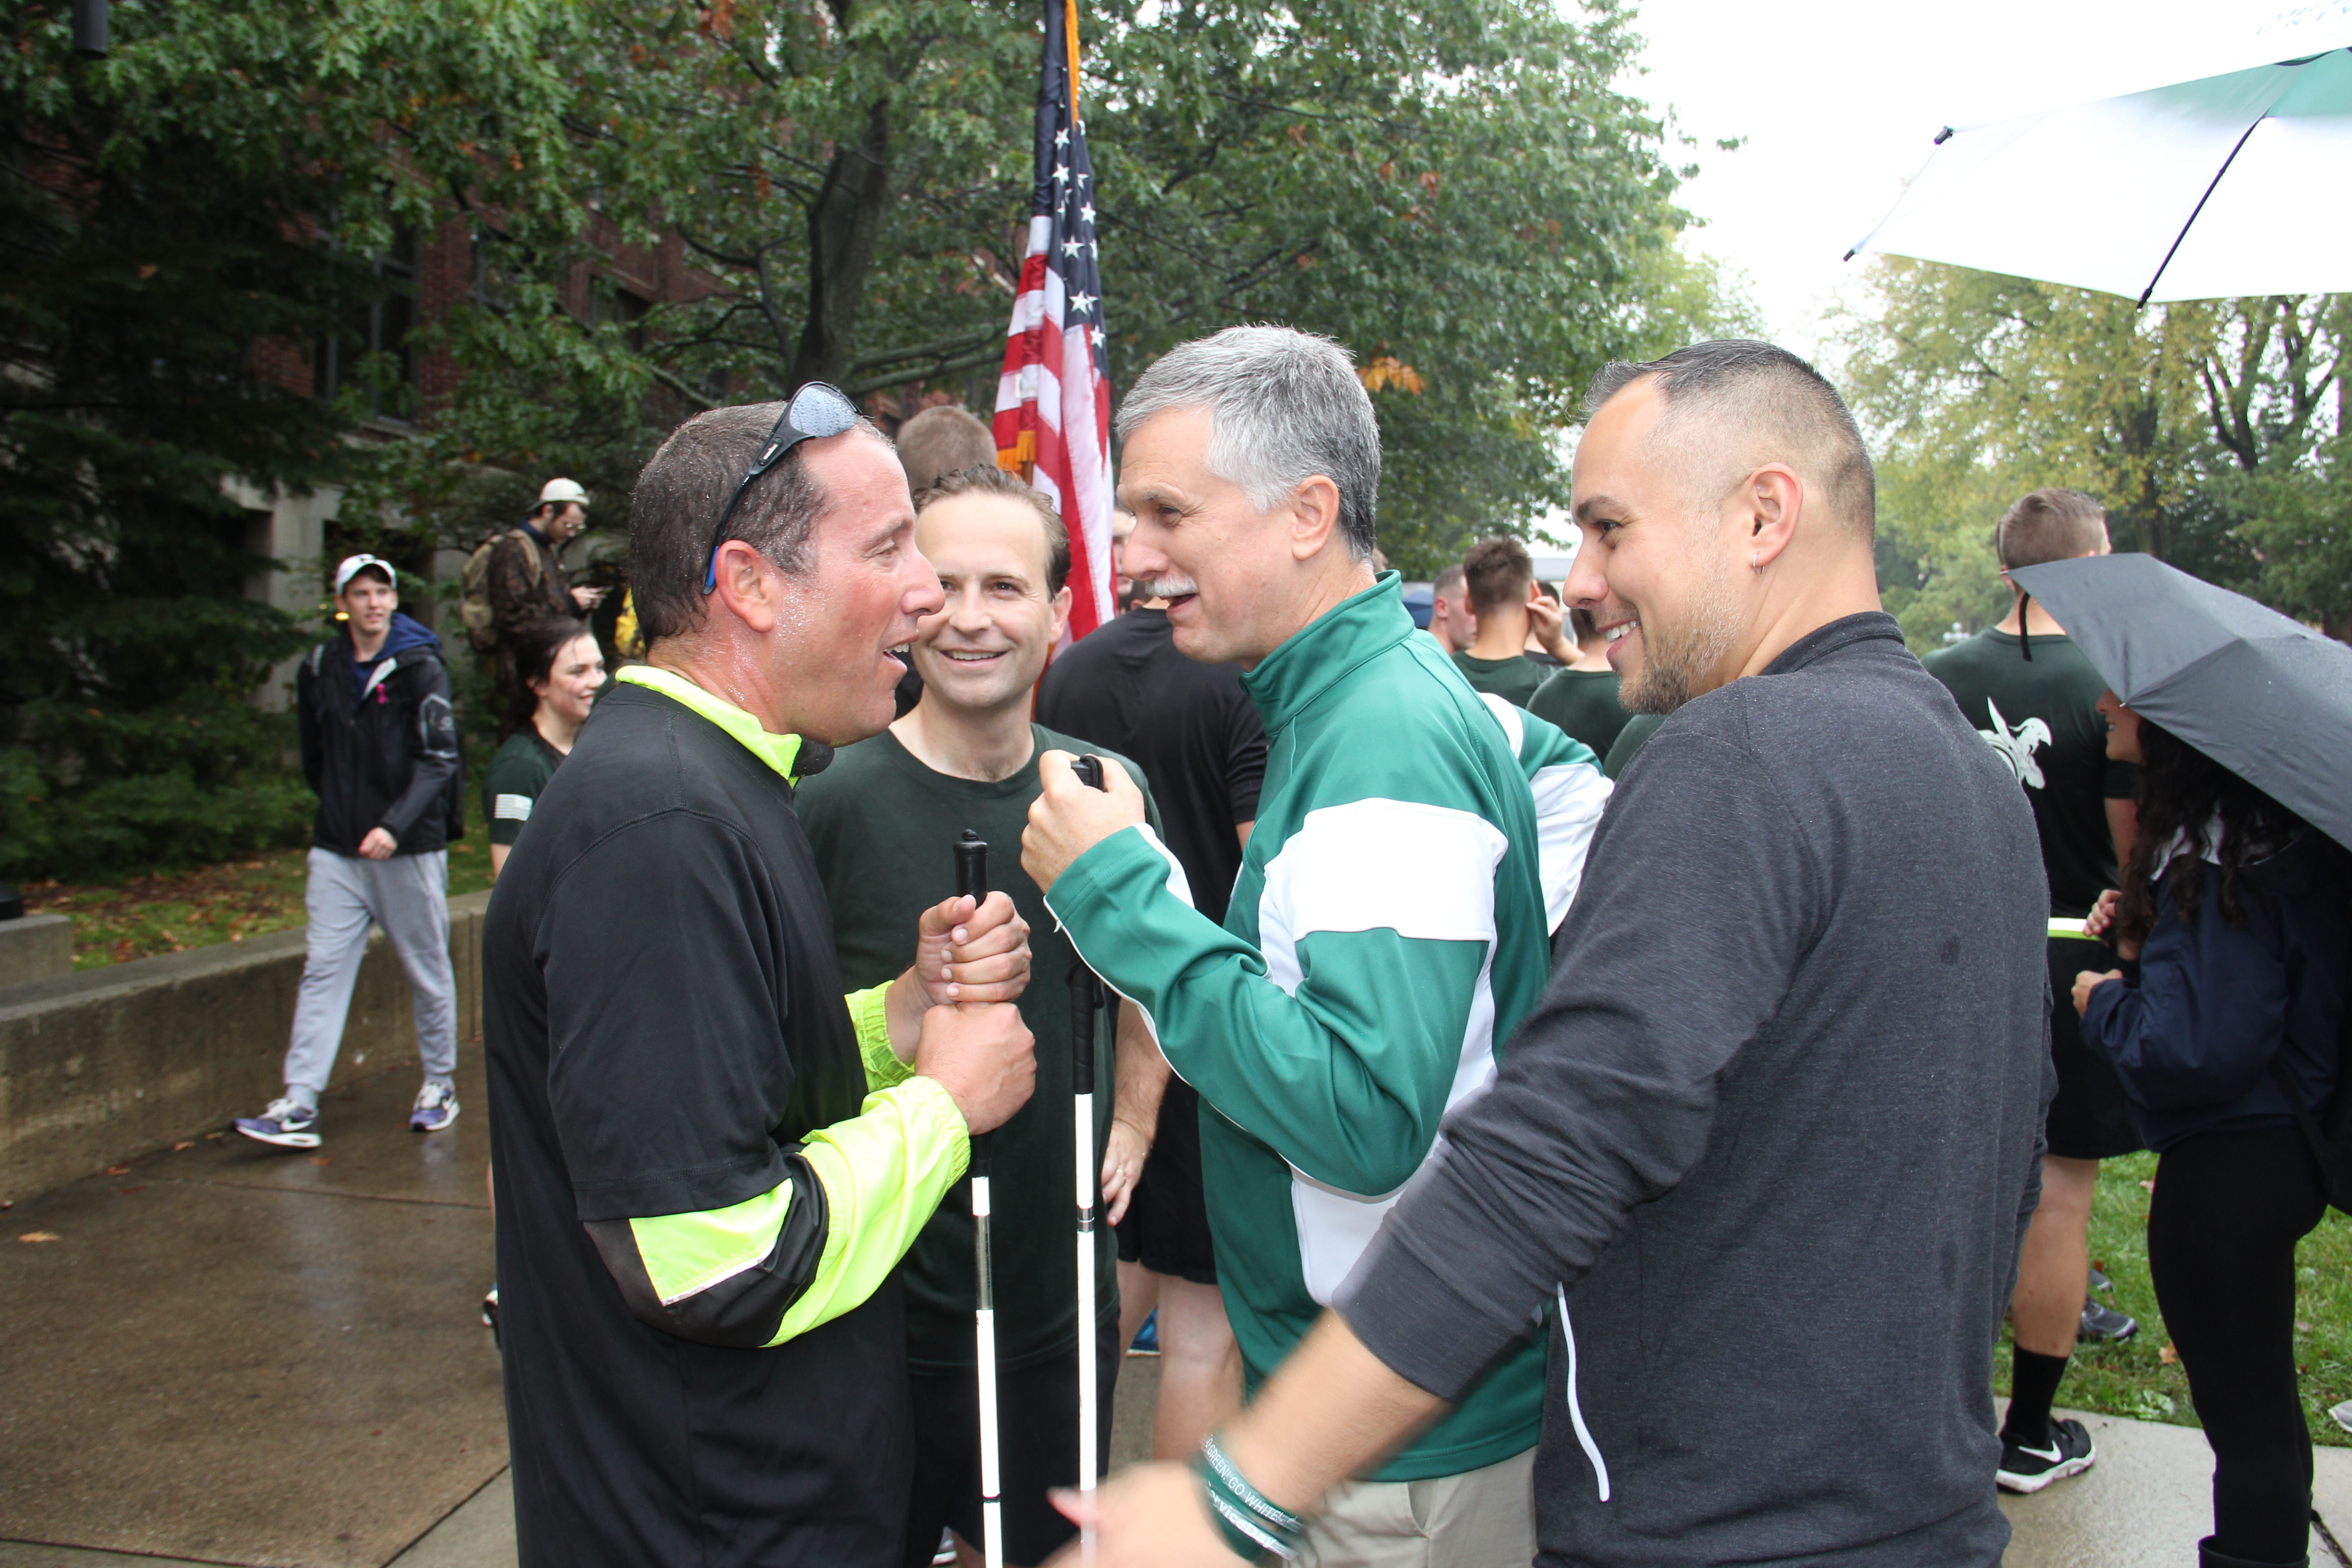 Candid photo of Justice Richard Bernstein, Fmr. Lt. Gov. Brian Calley, Michael Hudson and Caleb Sandoval at the Alex’s Great State Race in 2017, all four are standing in conversation and smiling, ROTC Cadets are visible in the background holding the American flag.